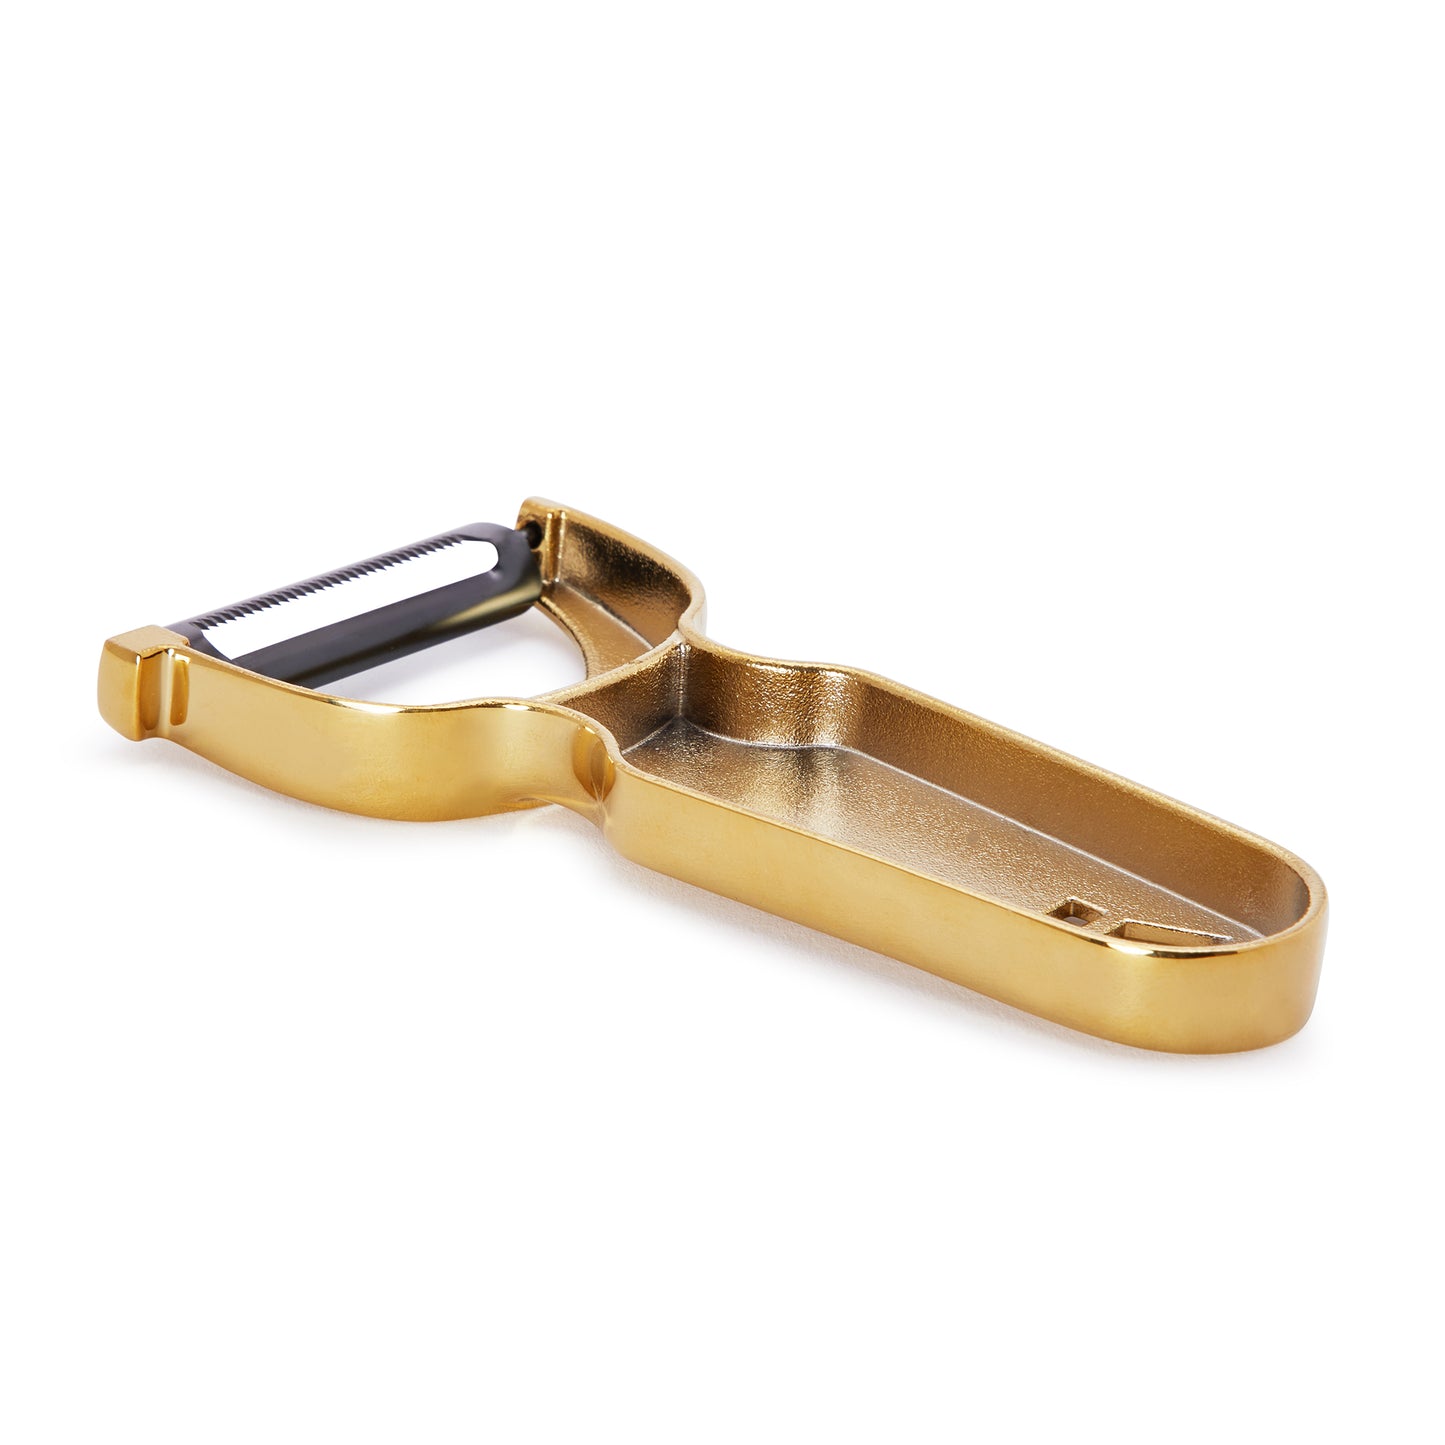 BUSWELL CAST METAL PEELER - SERRATED / GOLD-PLATED – Cocktail Kingdom